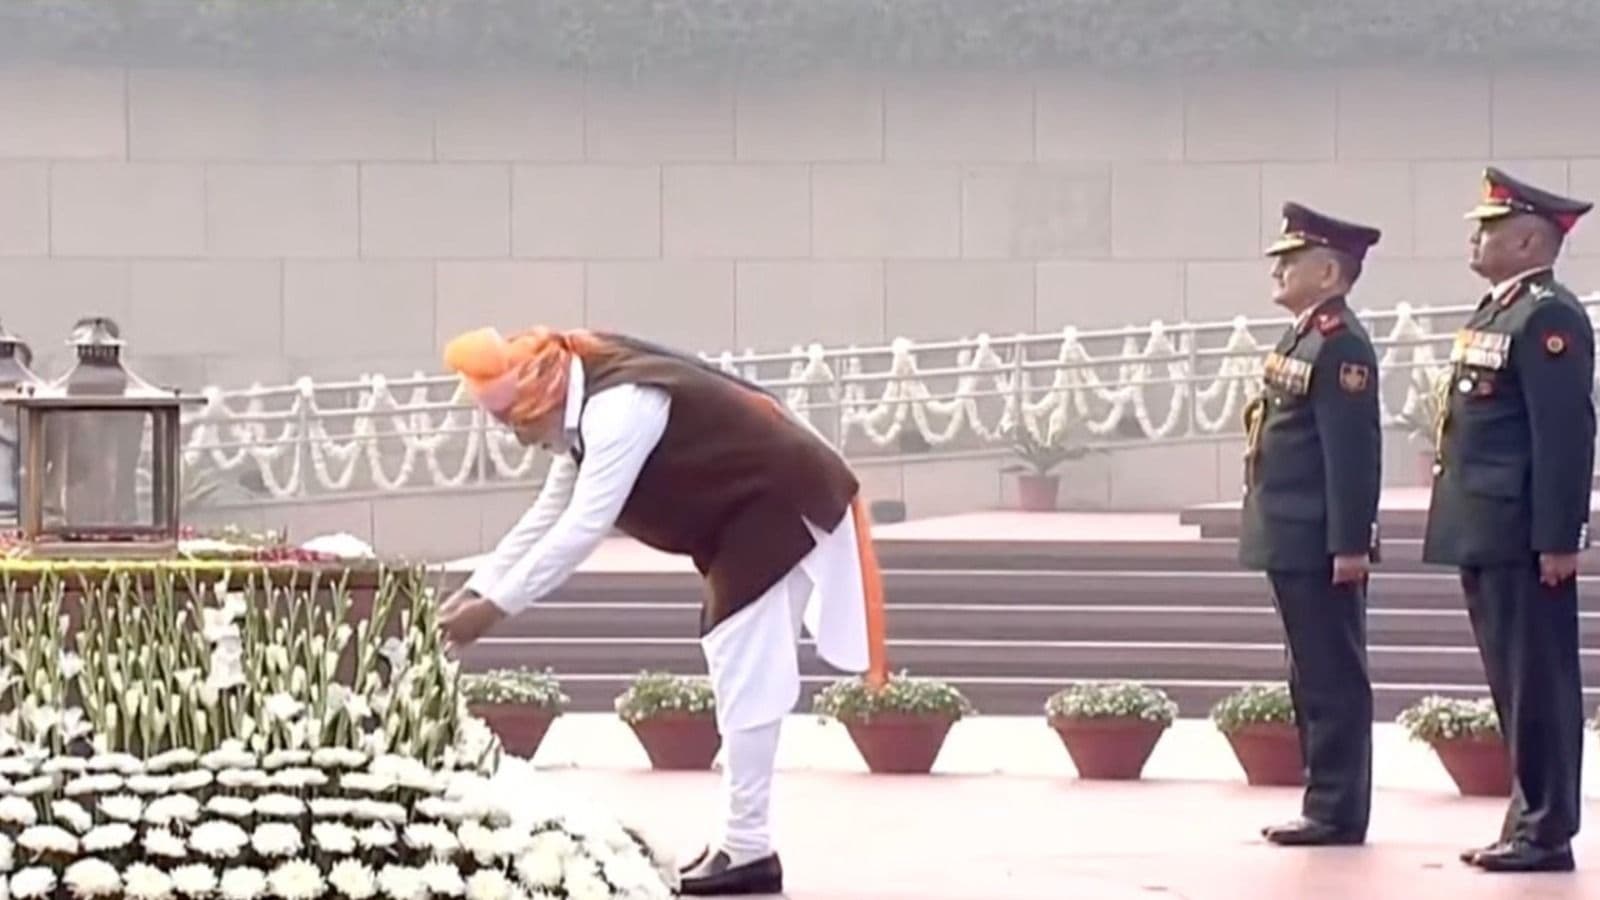 PM Modi lays wreath at the National War Memorial, leads the nation in paying homage to the braveheart soldiers